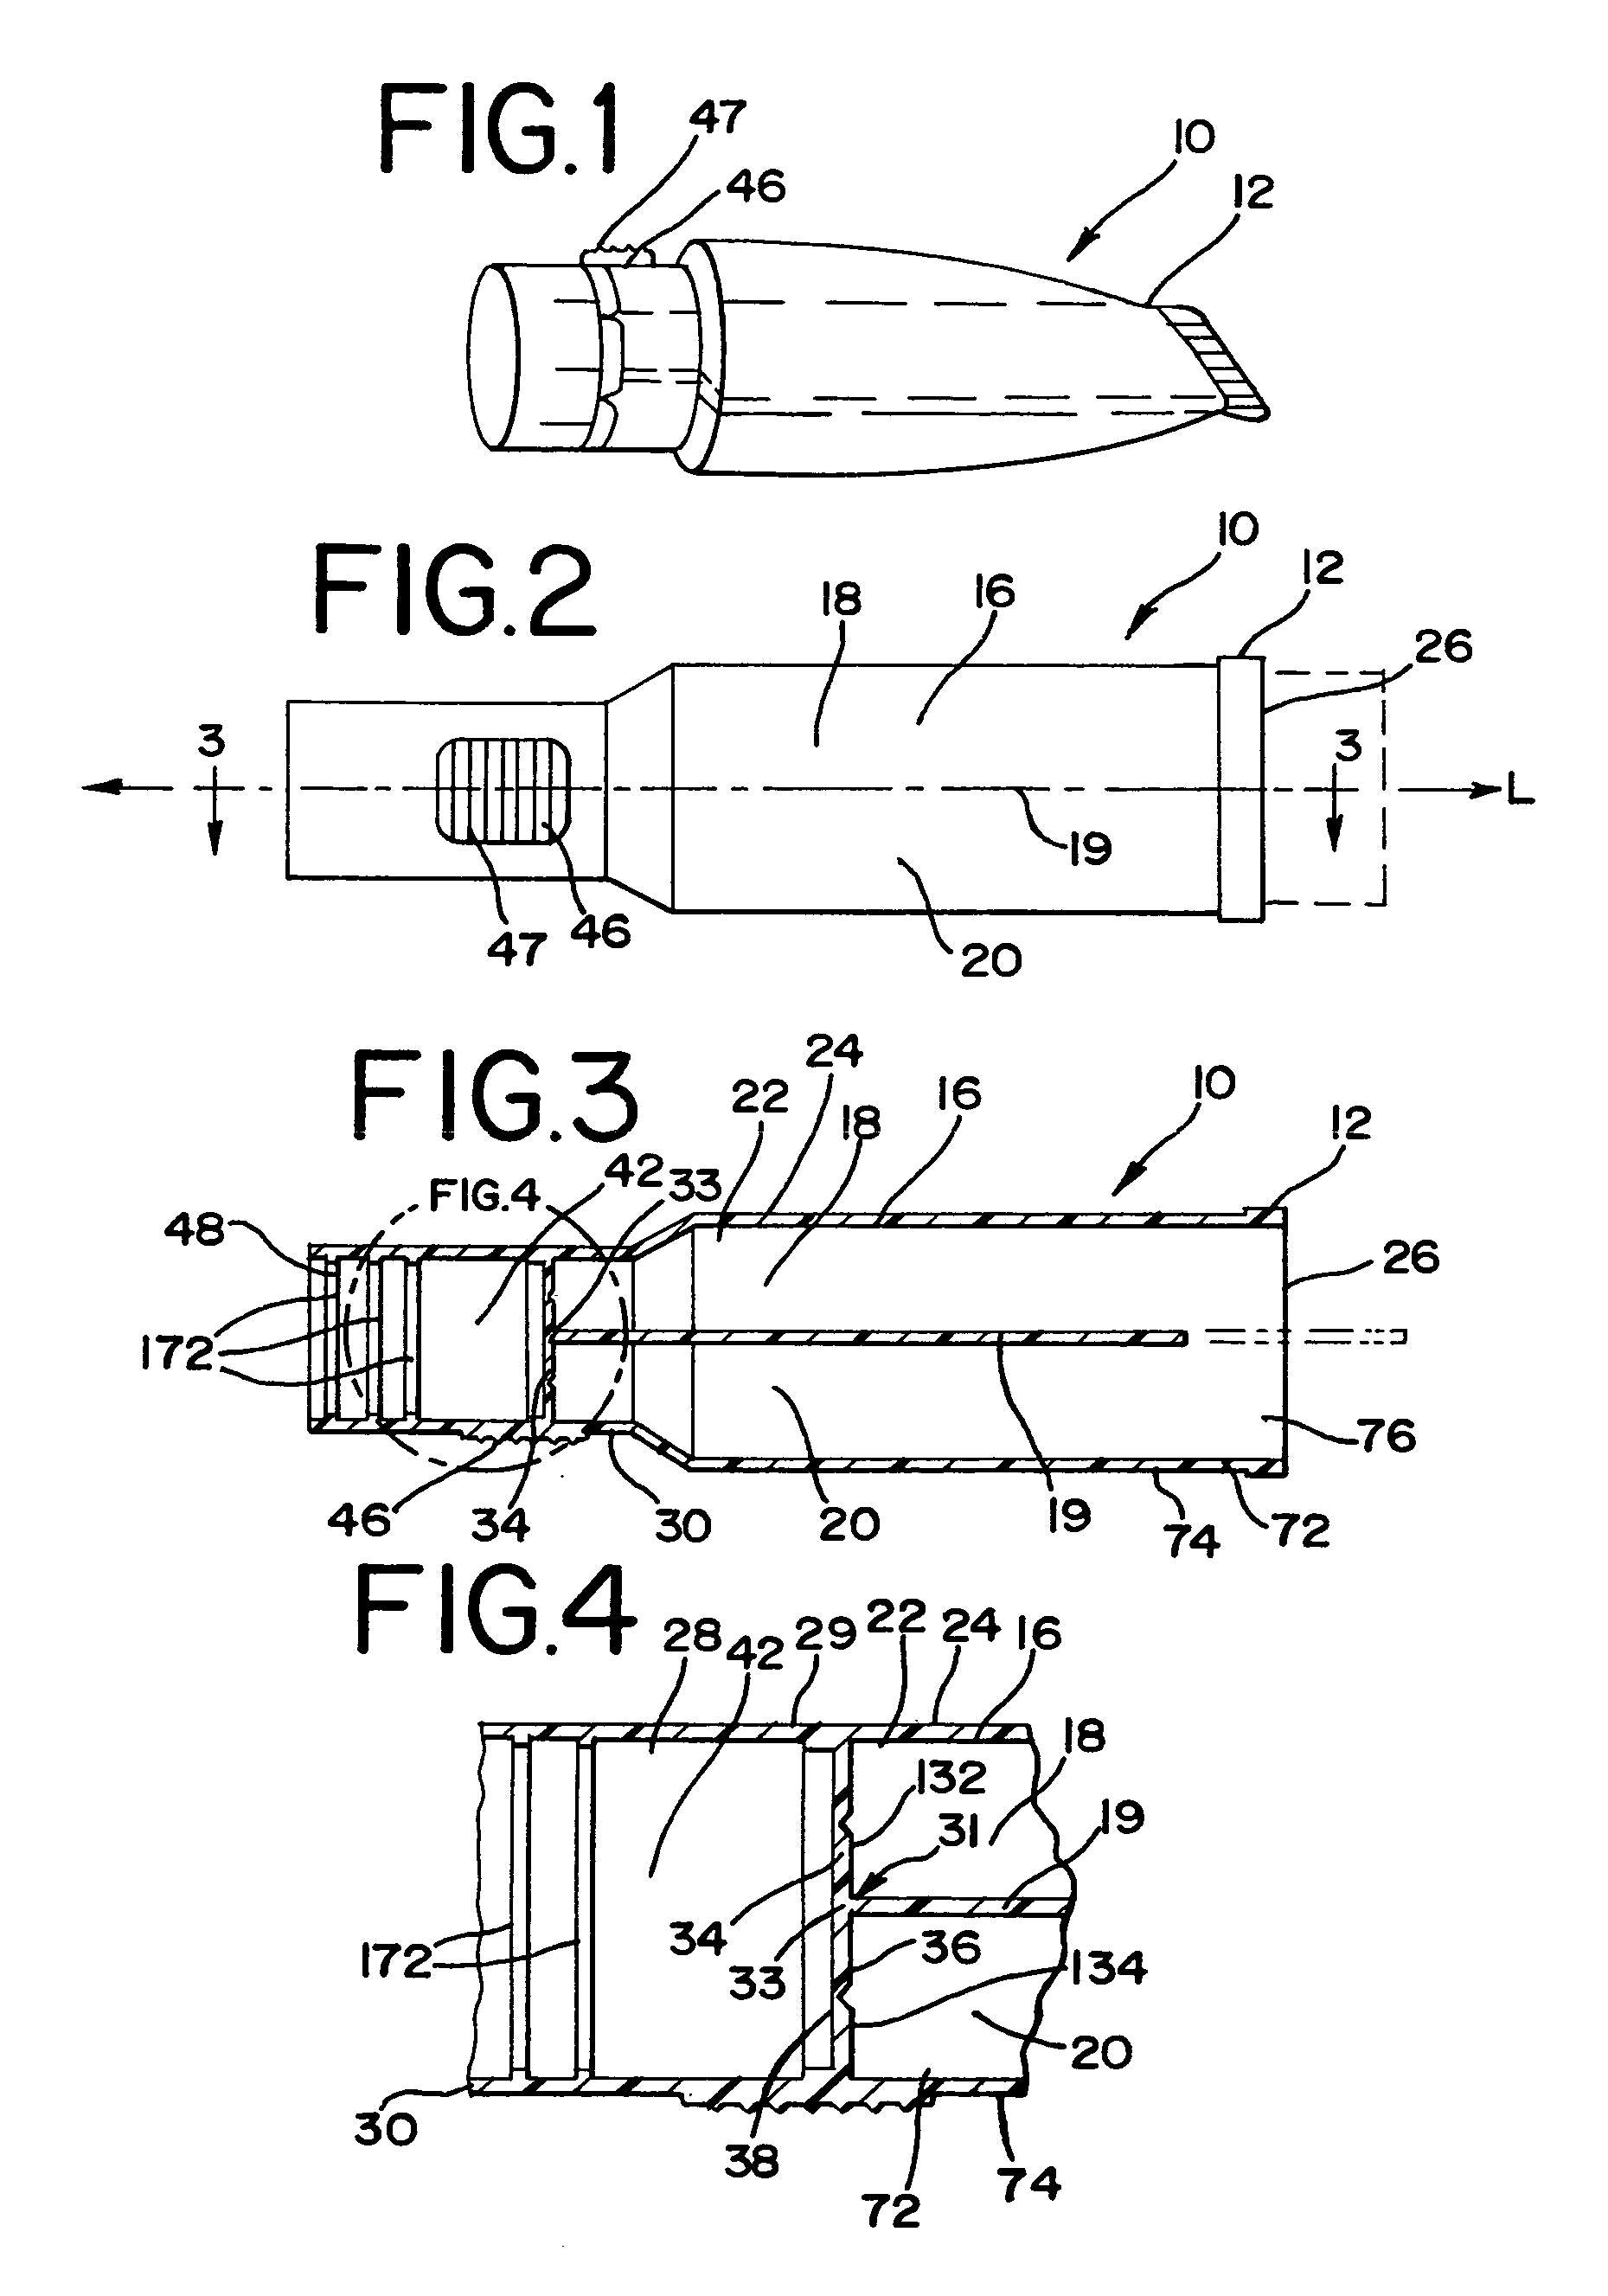 Multi-chambered dispenser and process